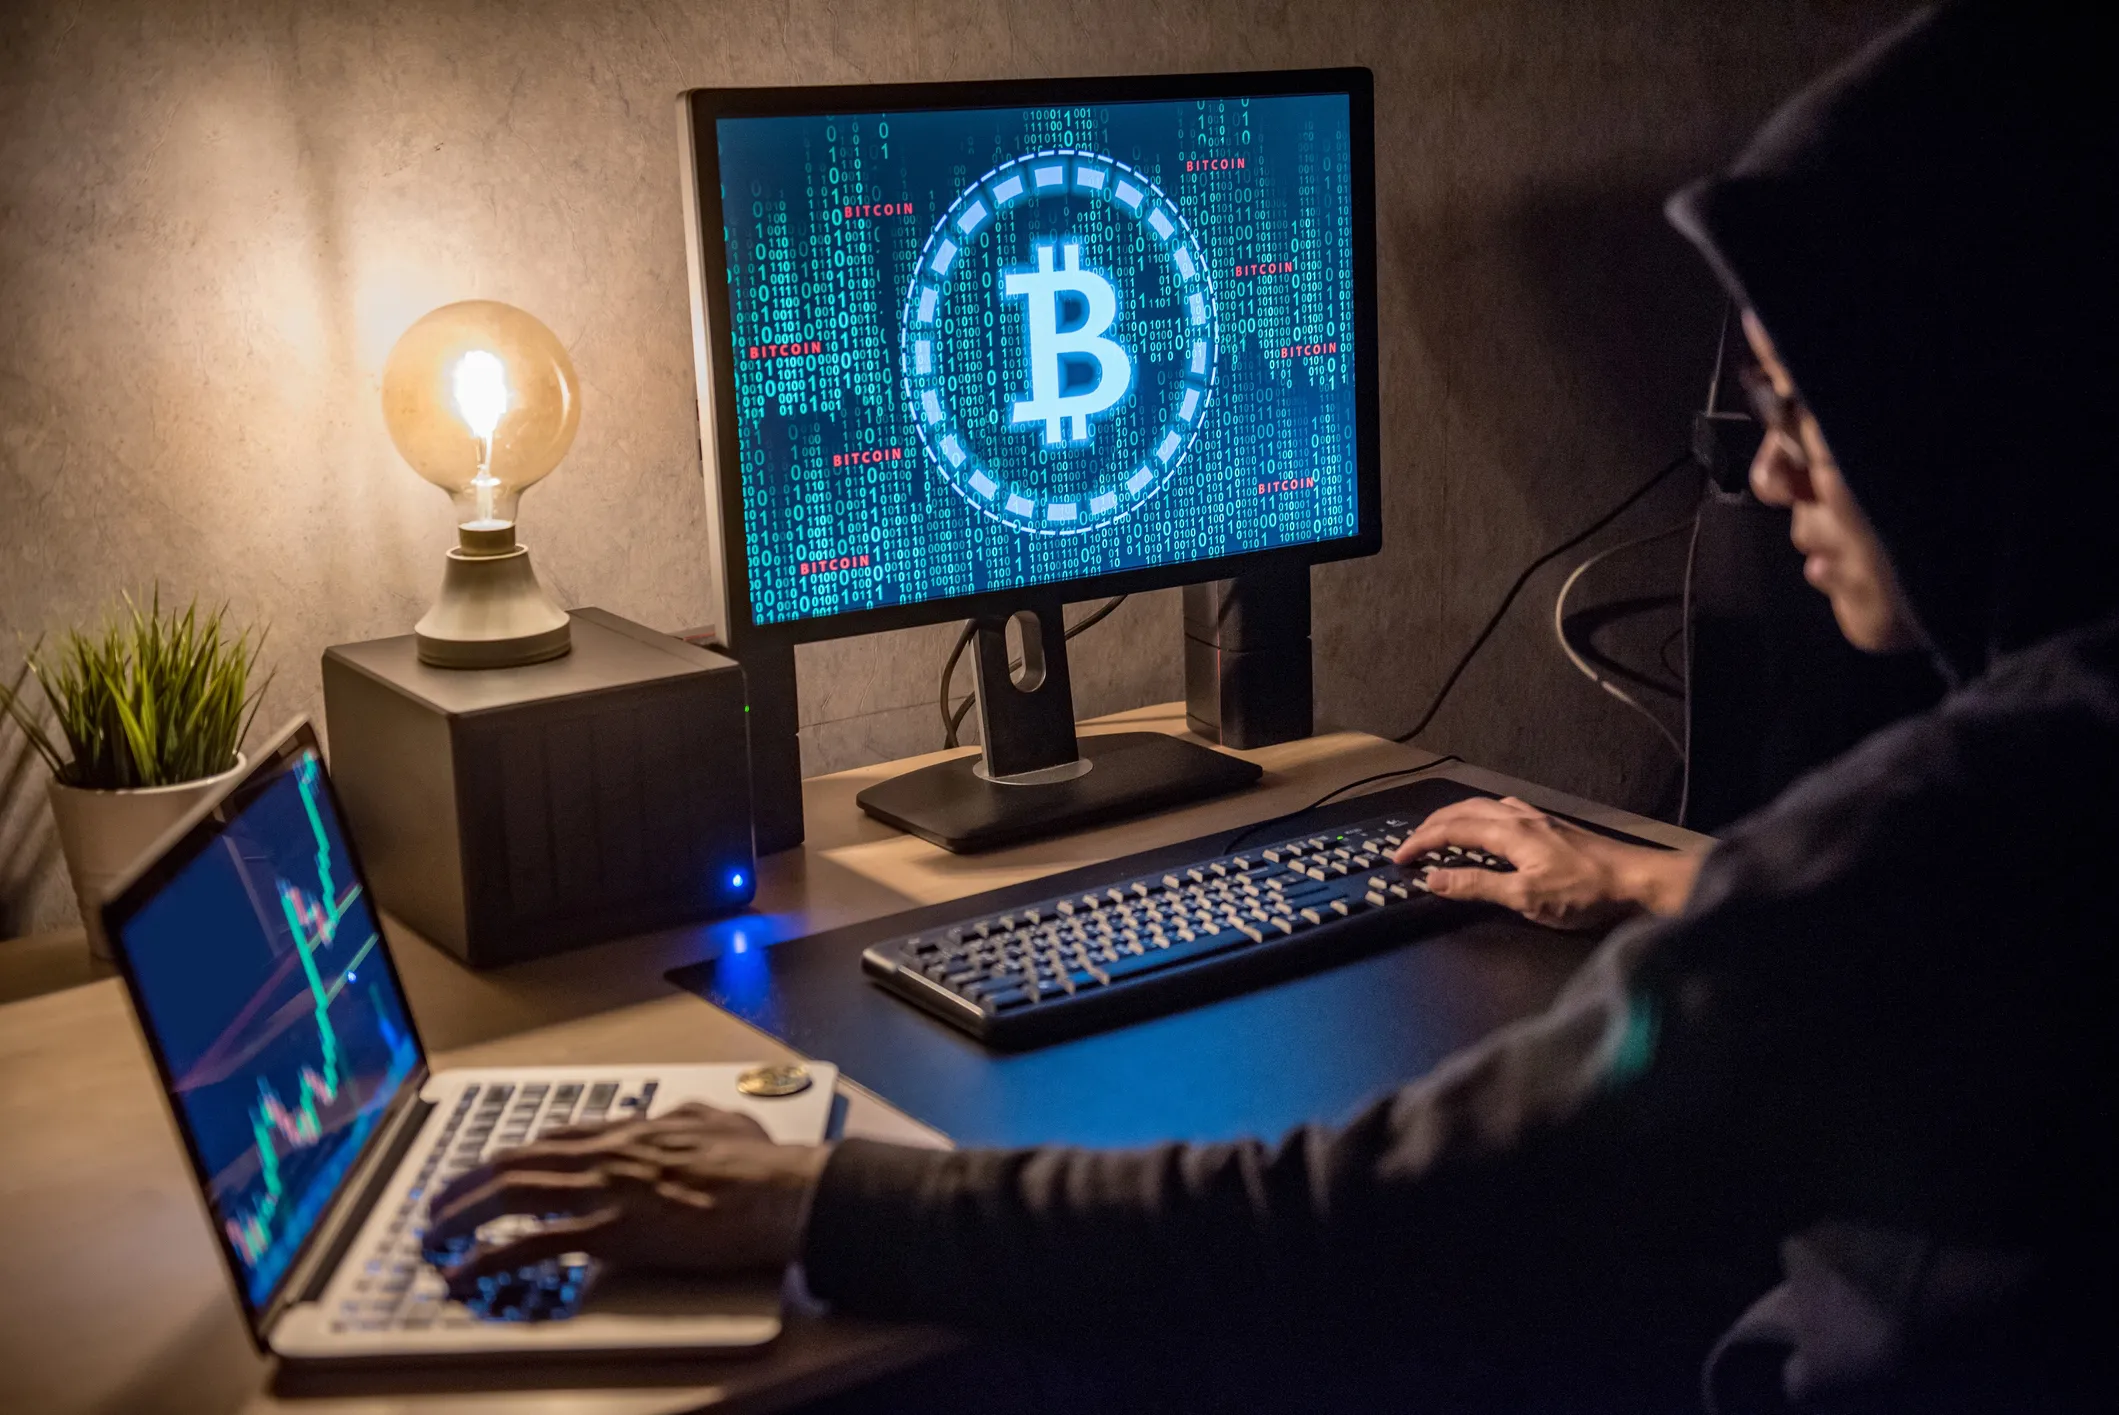 Hack crypto: October is the most important month for hacking cryptocurrencies according to Chainalysis